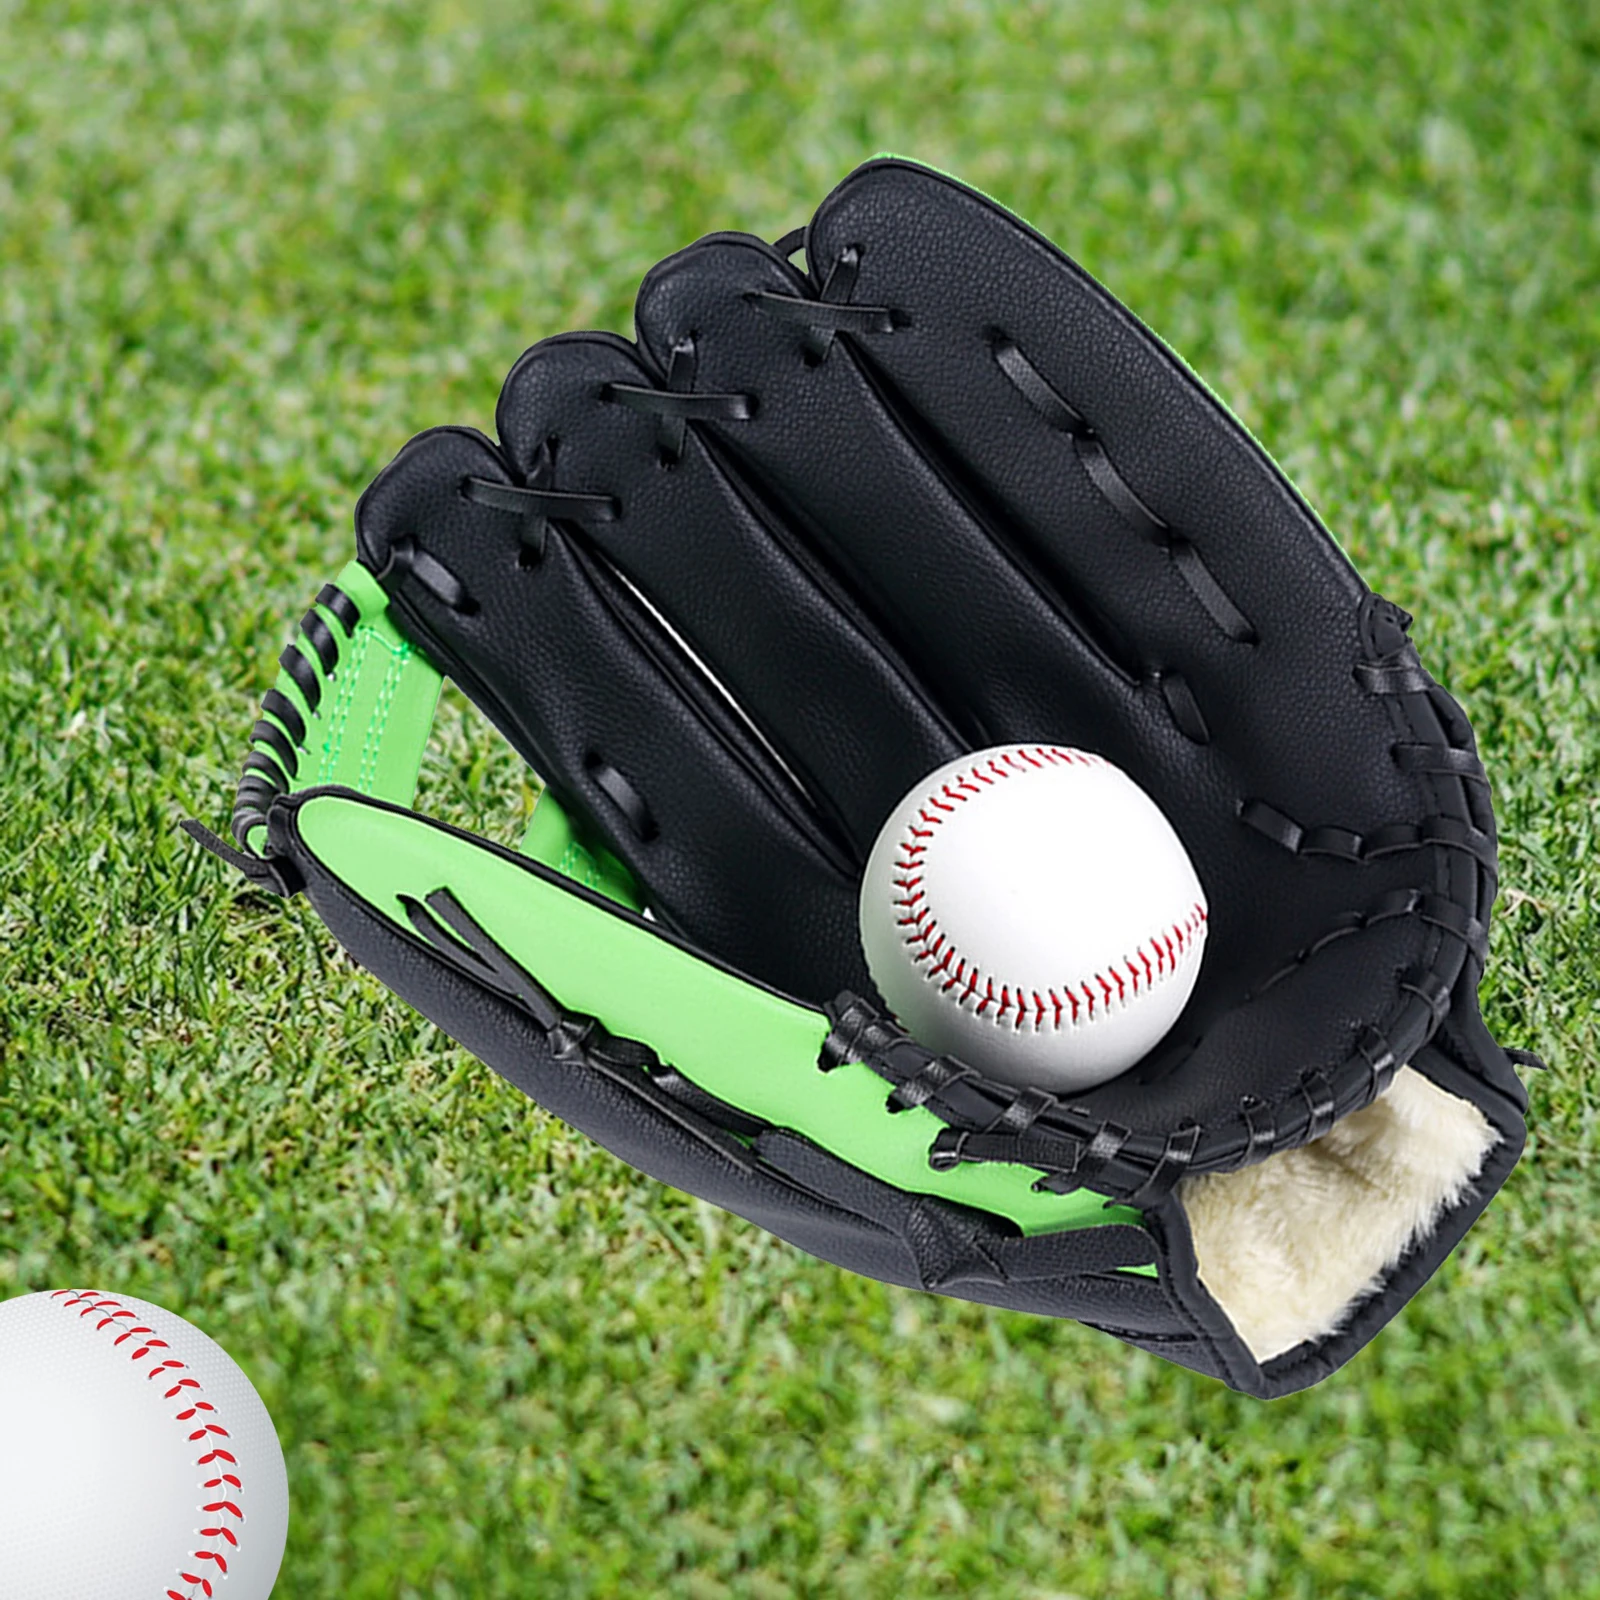 Adjustable Premium Baseball Gloves Soft Solid Leather Softball Teeball Glove for Batting Glove Ready to Play with Ball Glove